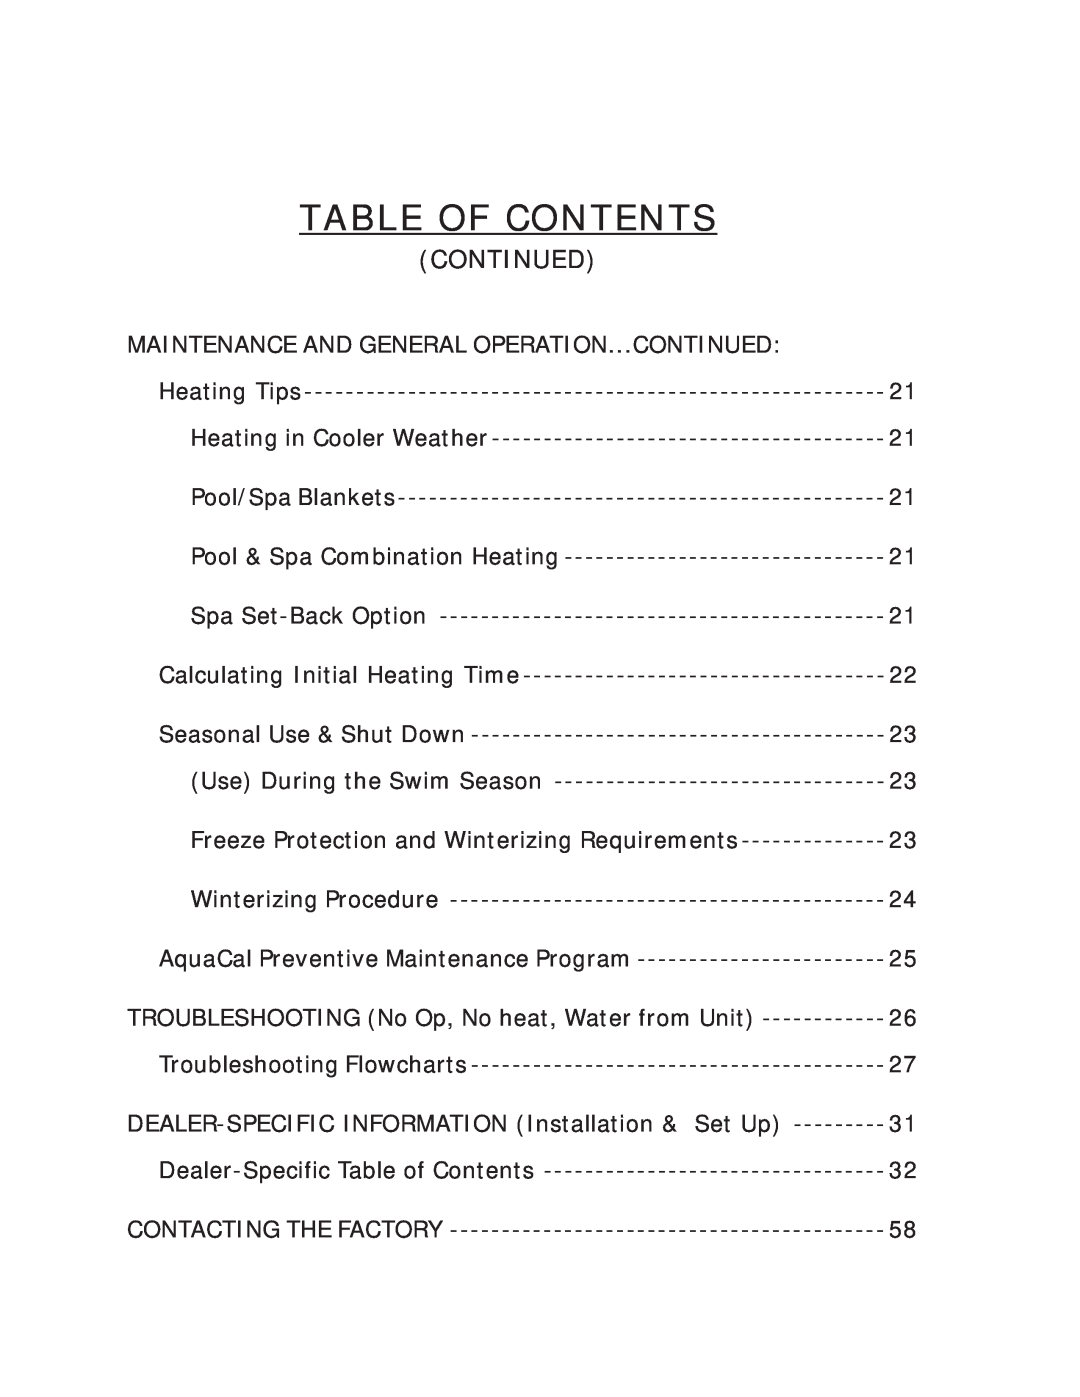 Aquacal 155, 120 owner manual Continued, Table Of Contents 